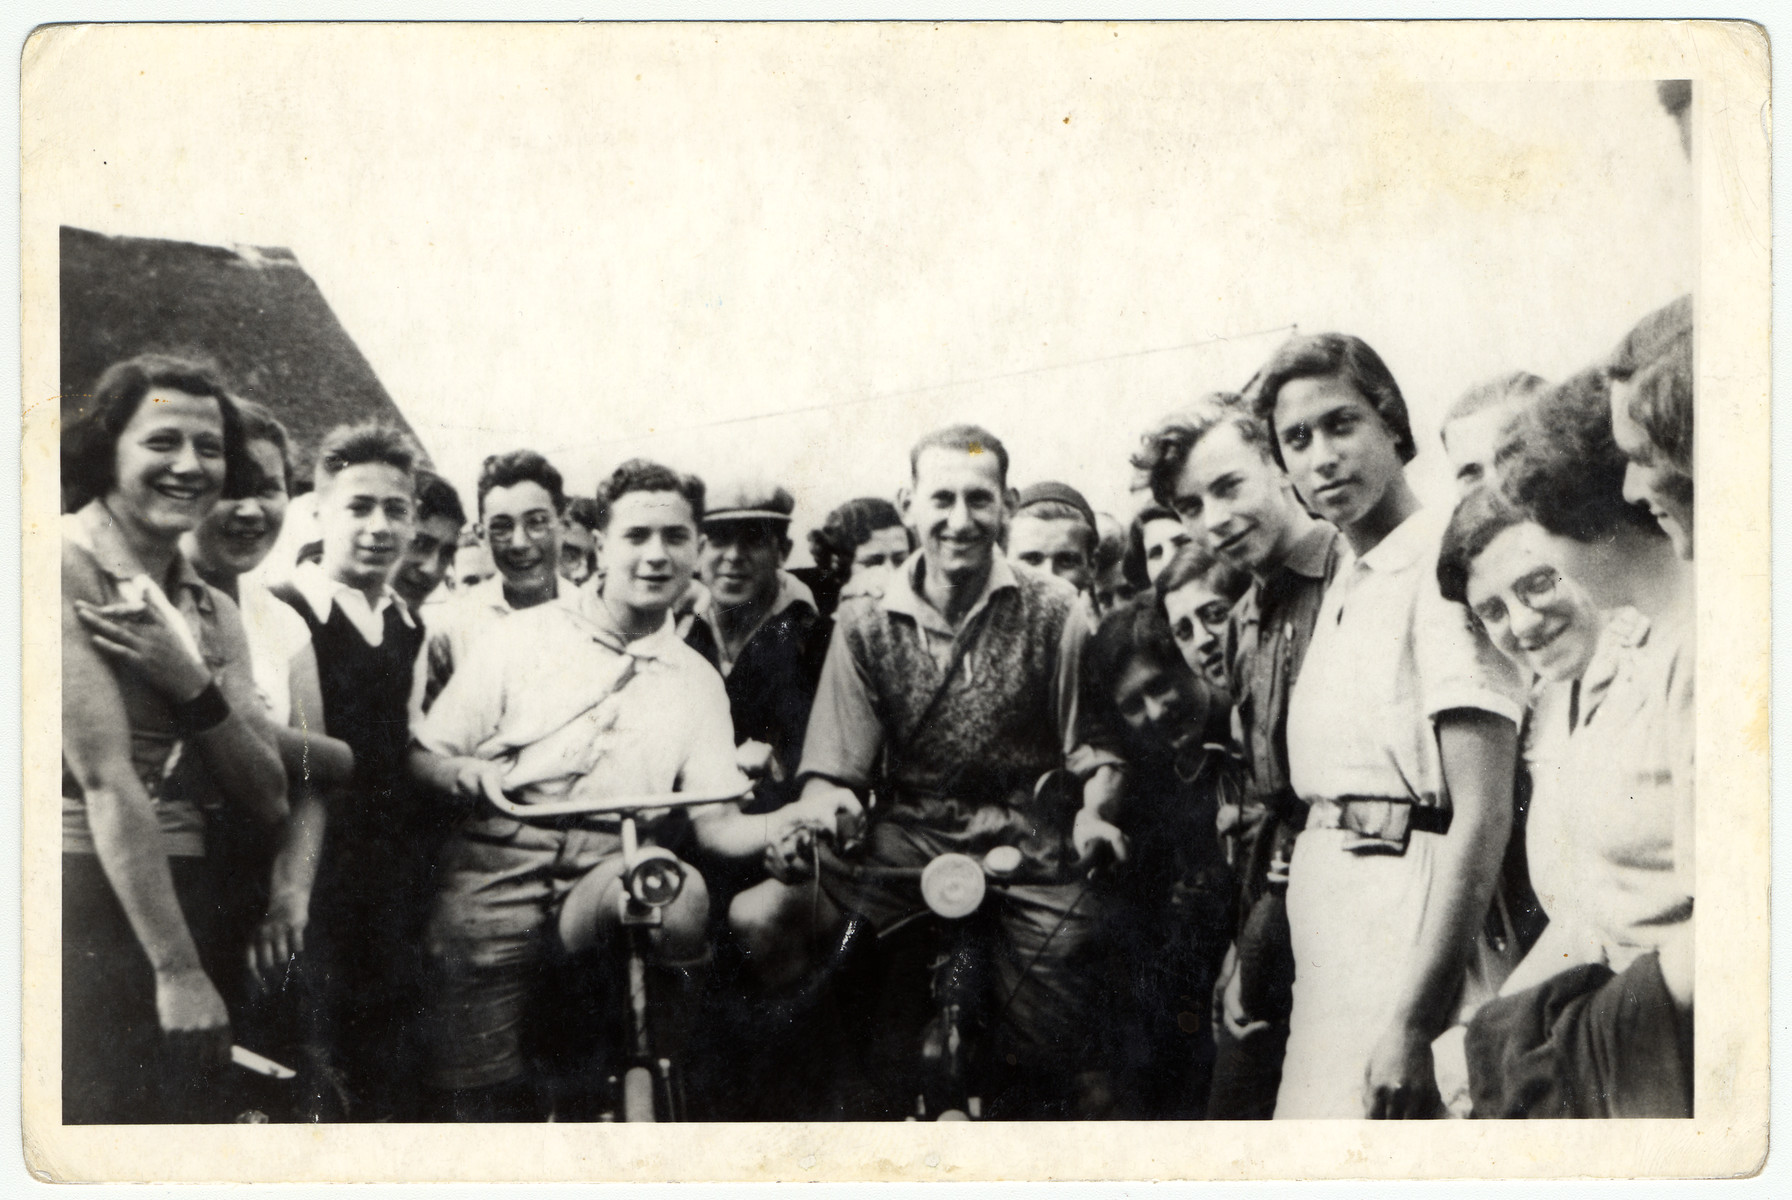 Group portrait of Zionist youth in a hachshara in The Netherlands.

Jacob Polak is pictured in the center right on a bicycle.